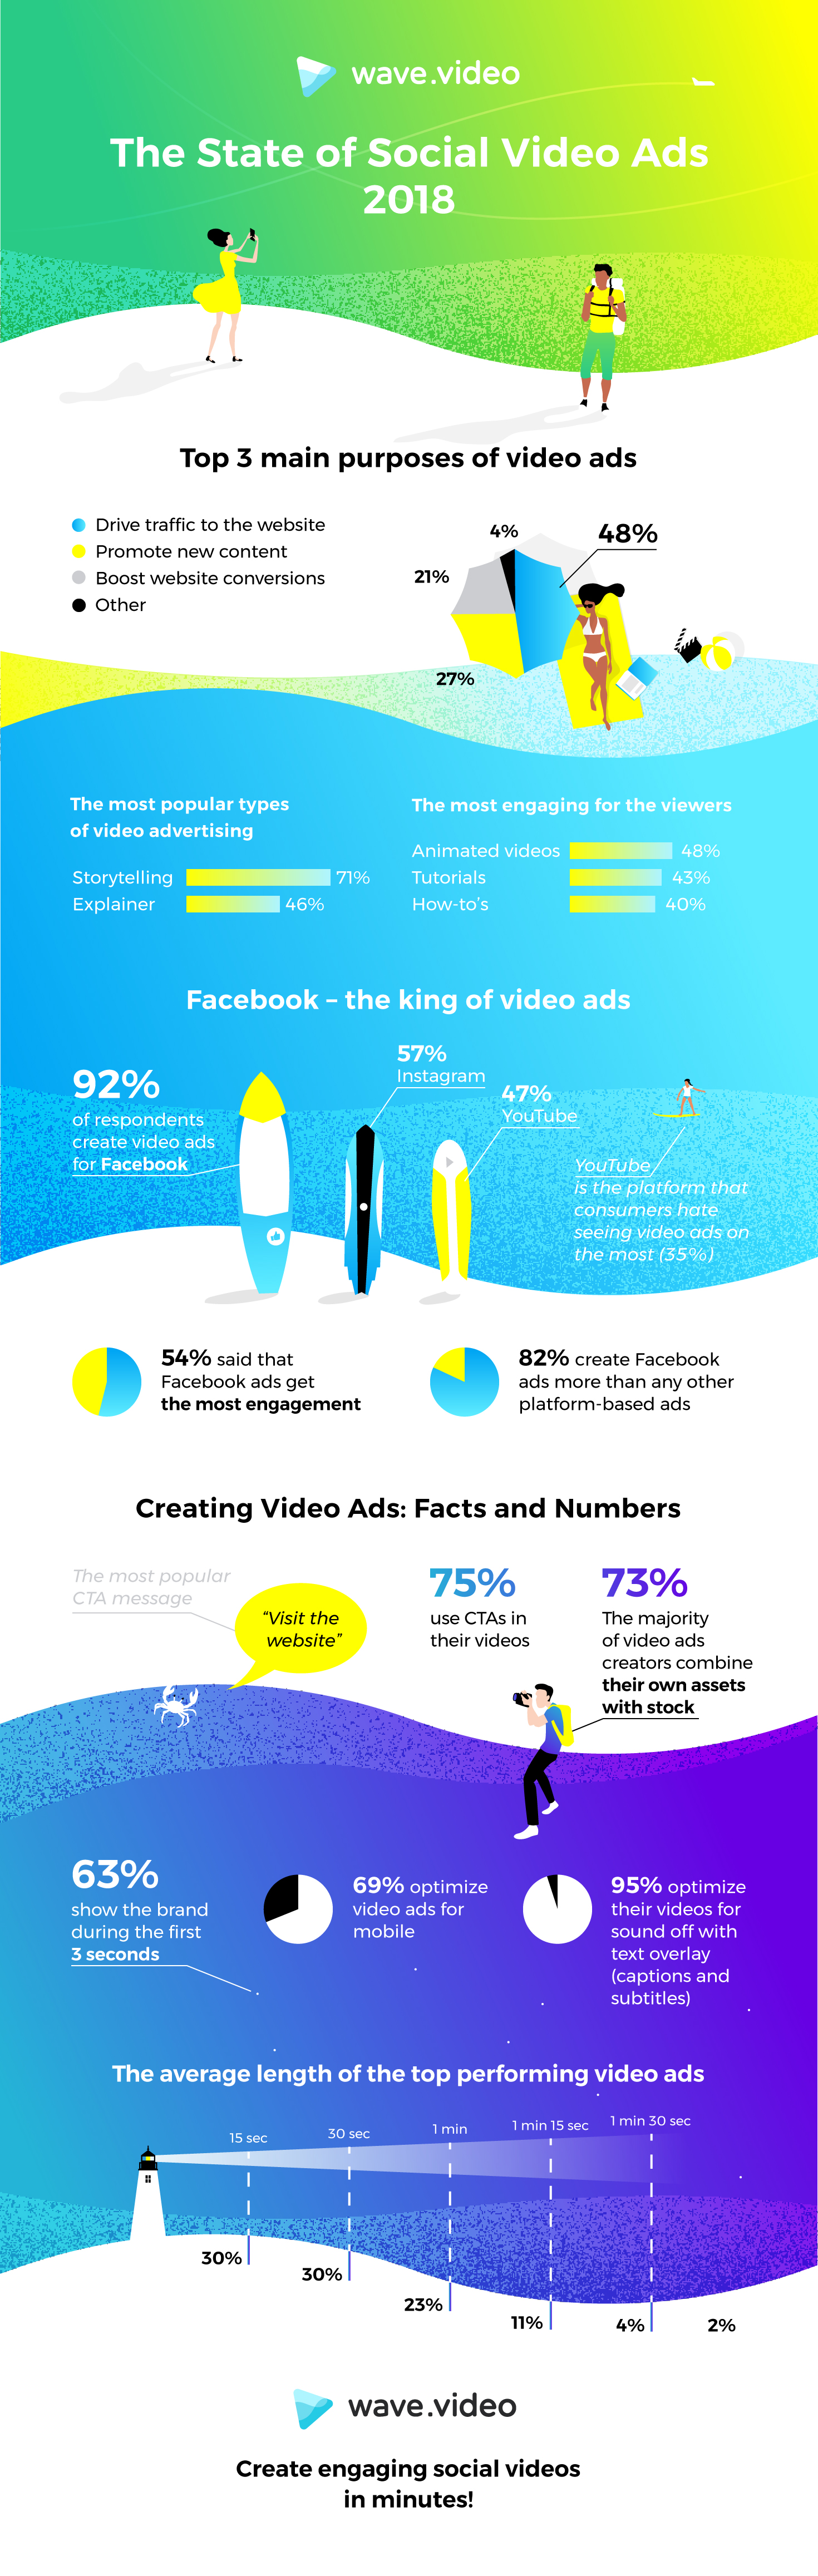 The State of Social Video Ads: Infographic